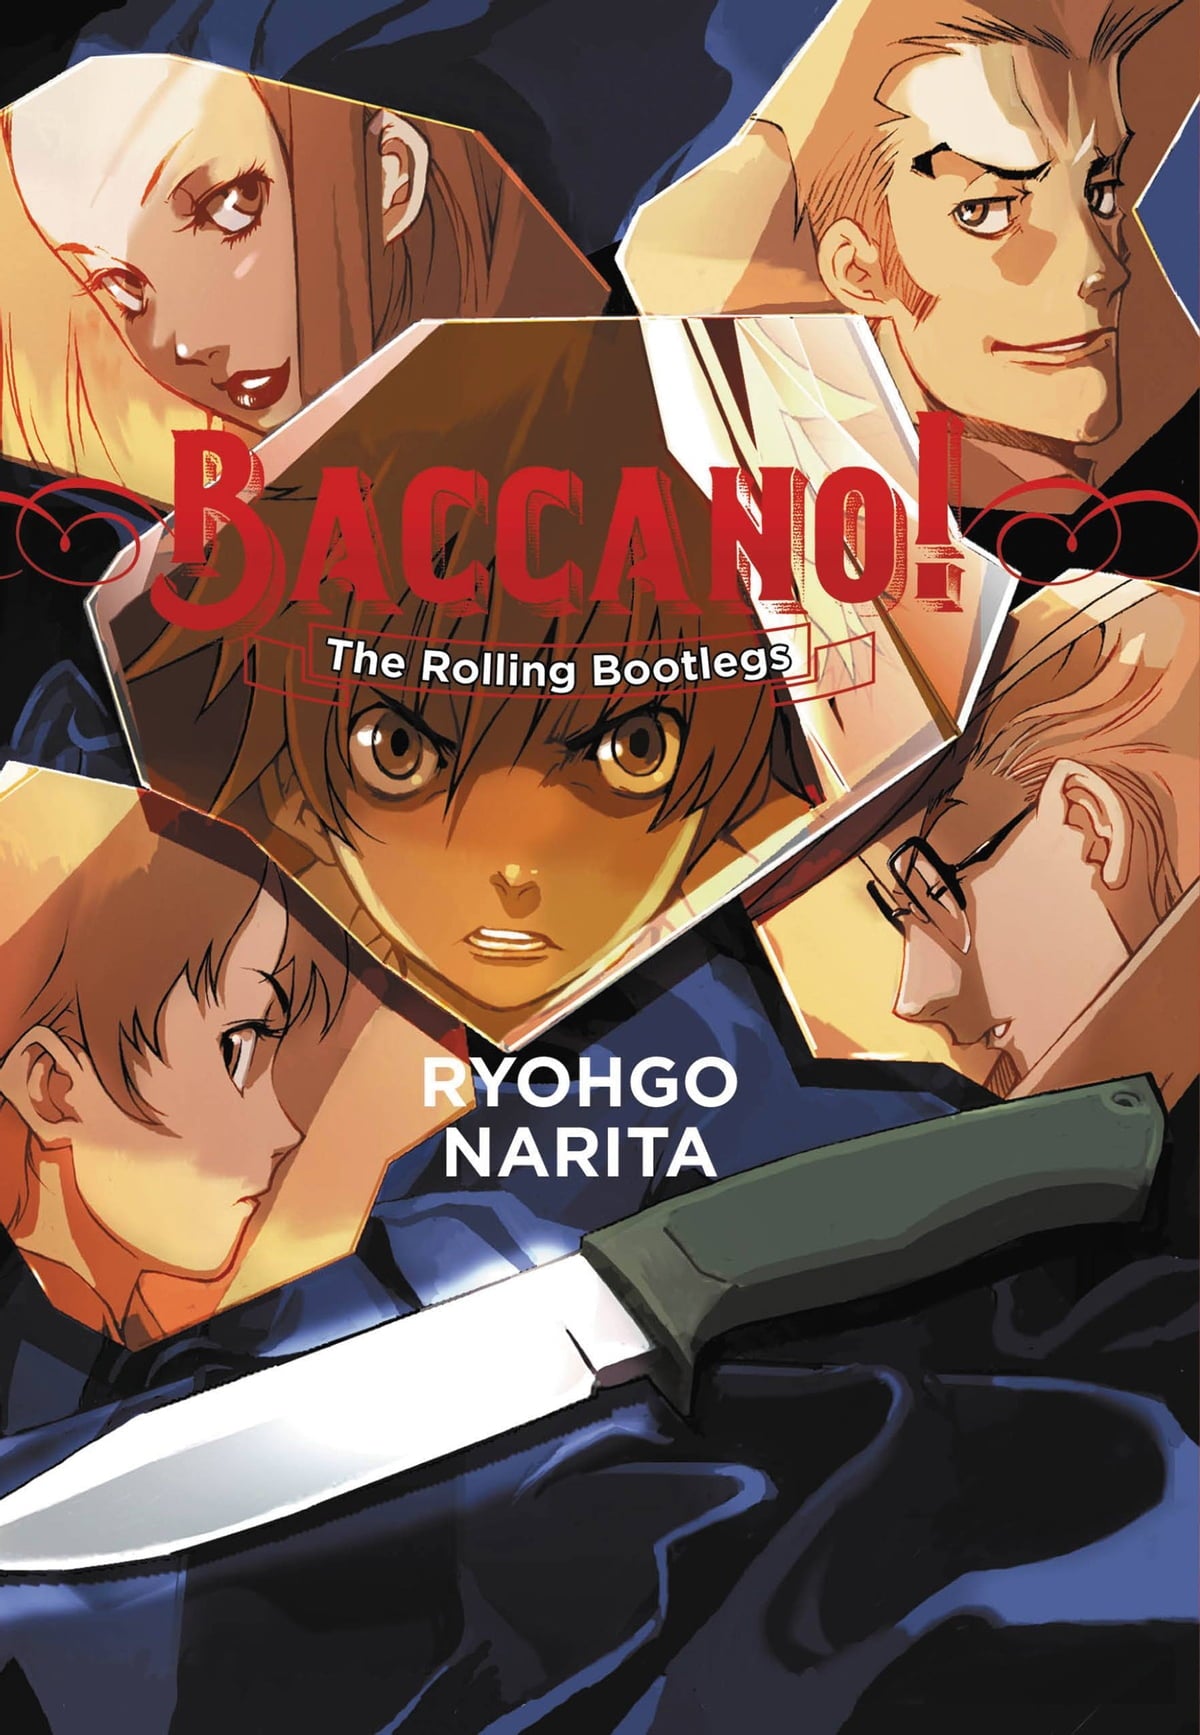 Baccano! Vol. 01 (Light Novel): The Rolling Bootlegs